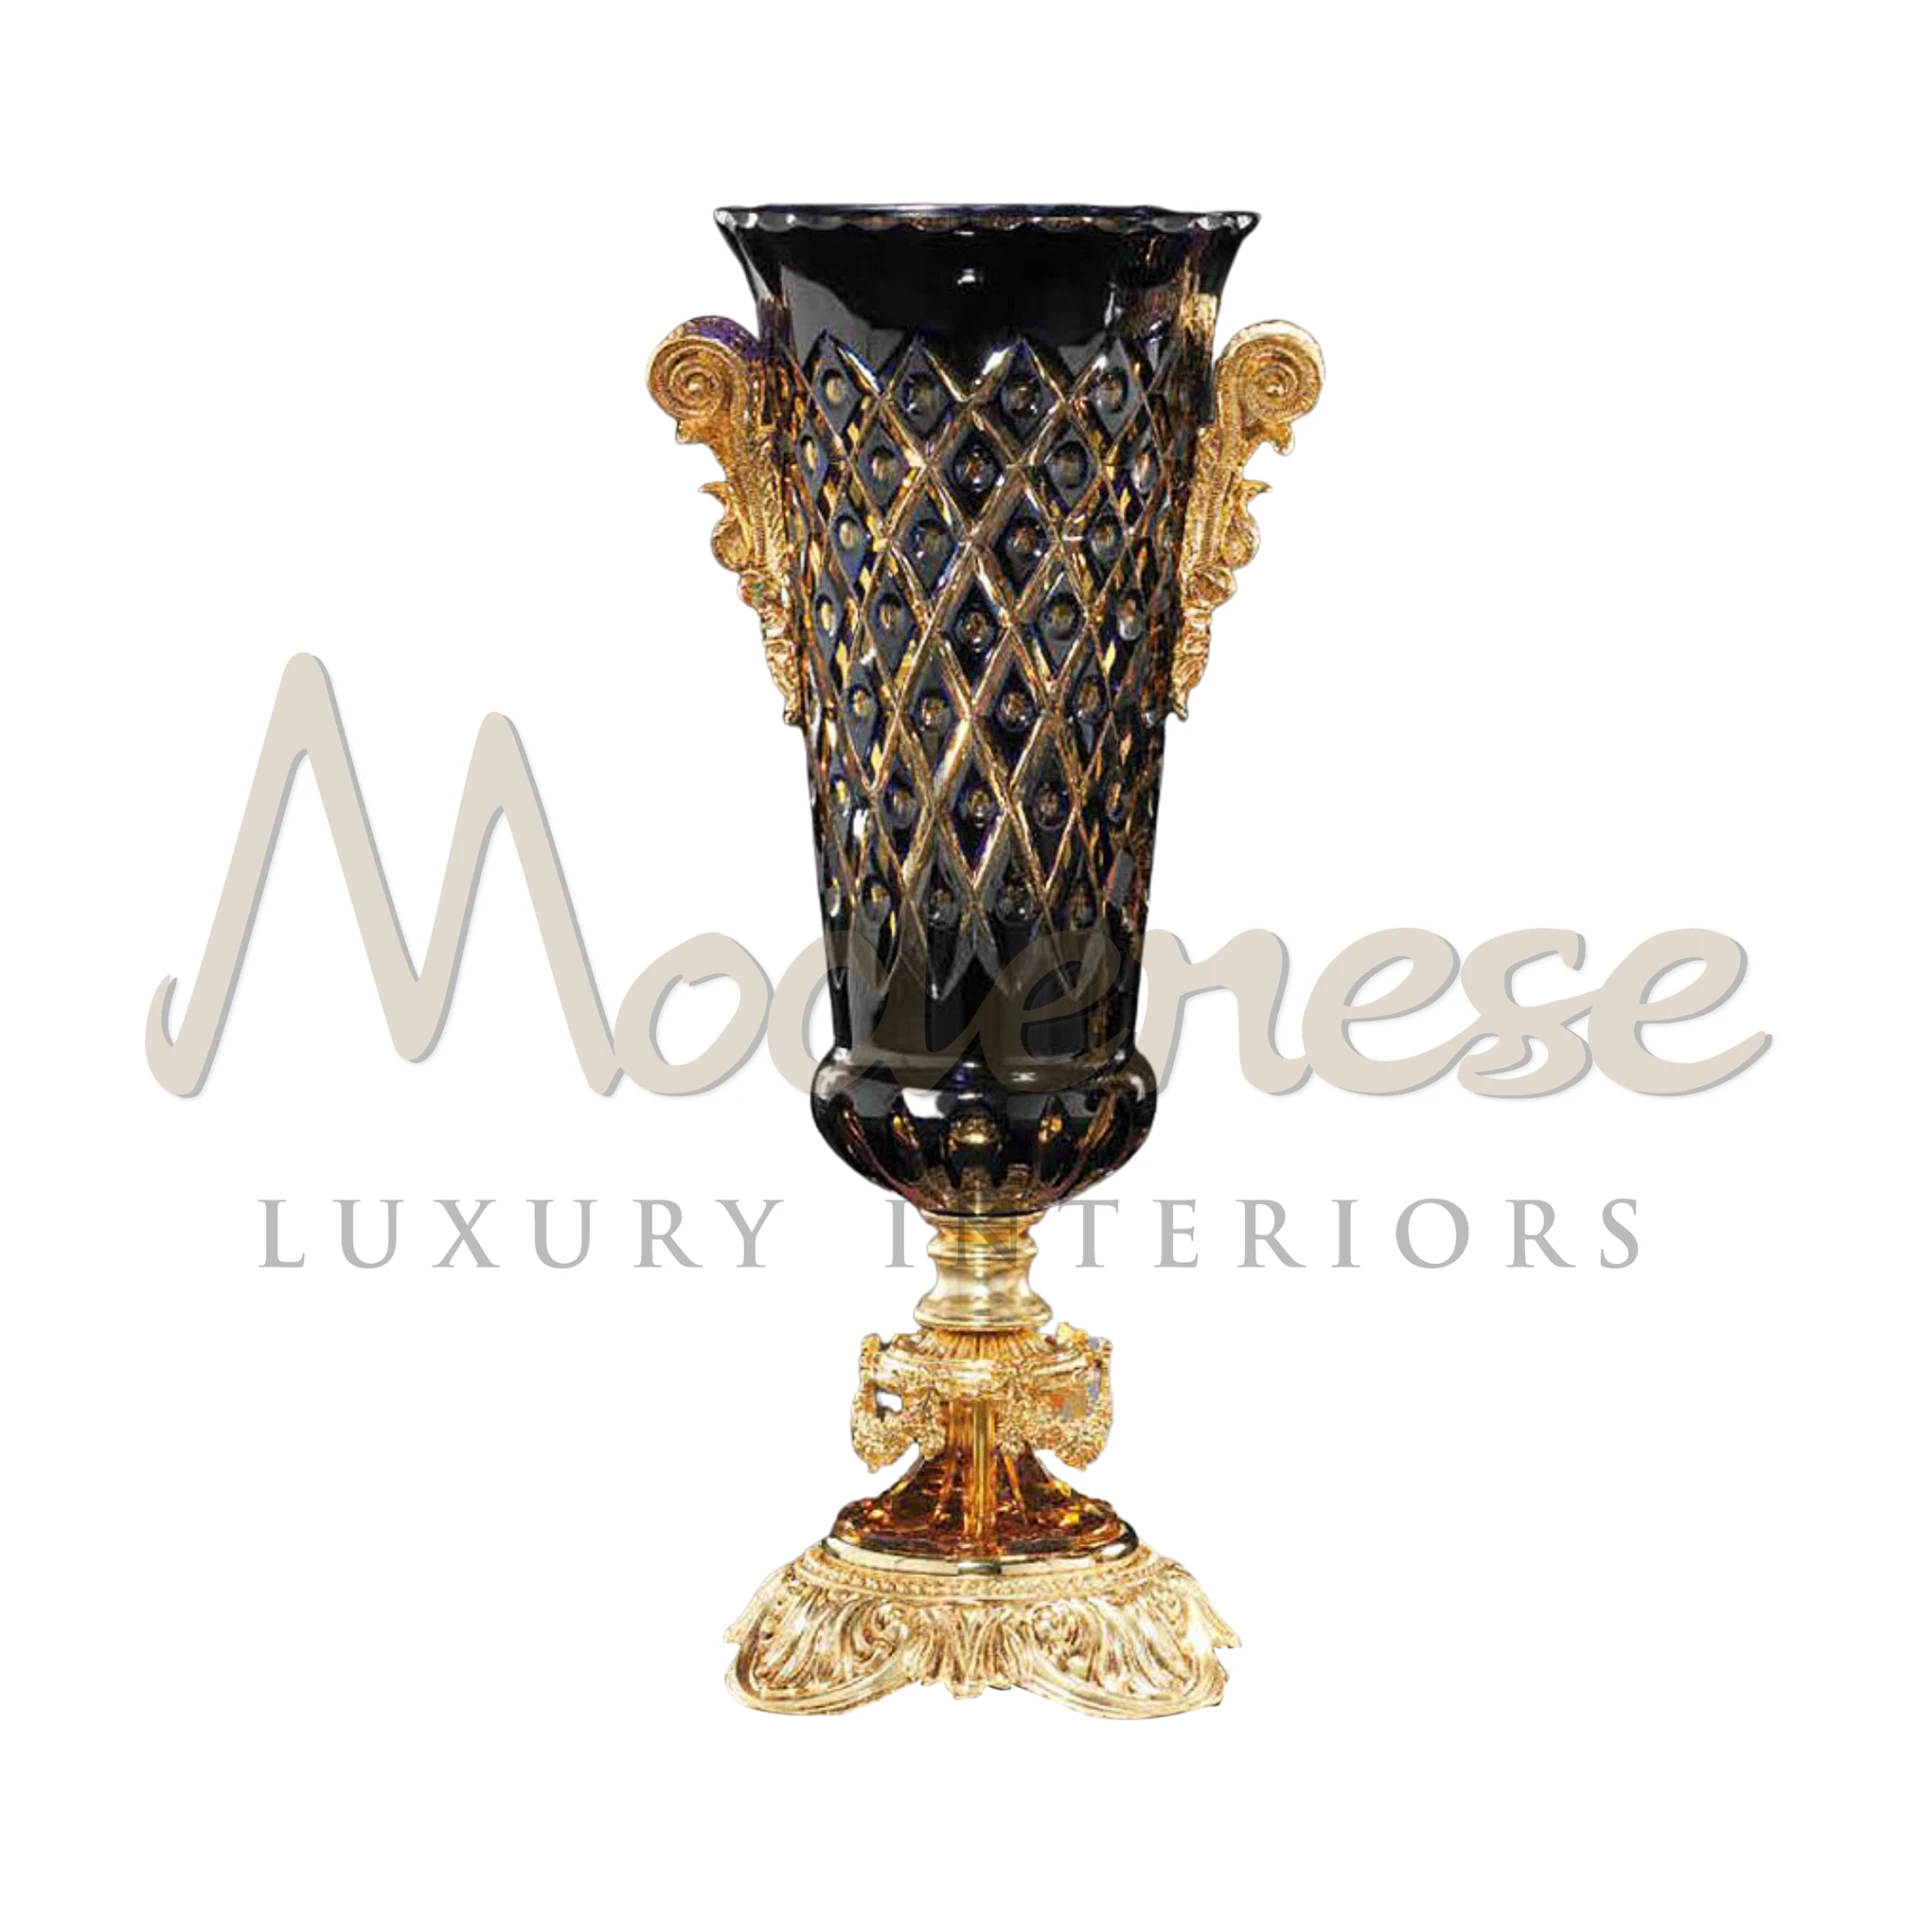 Ornate Victorian Tall Glass Vase by Modenese, embodying traditional luxury and skilled artisanship for elegant interiors.